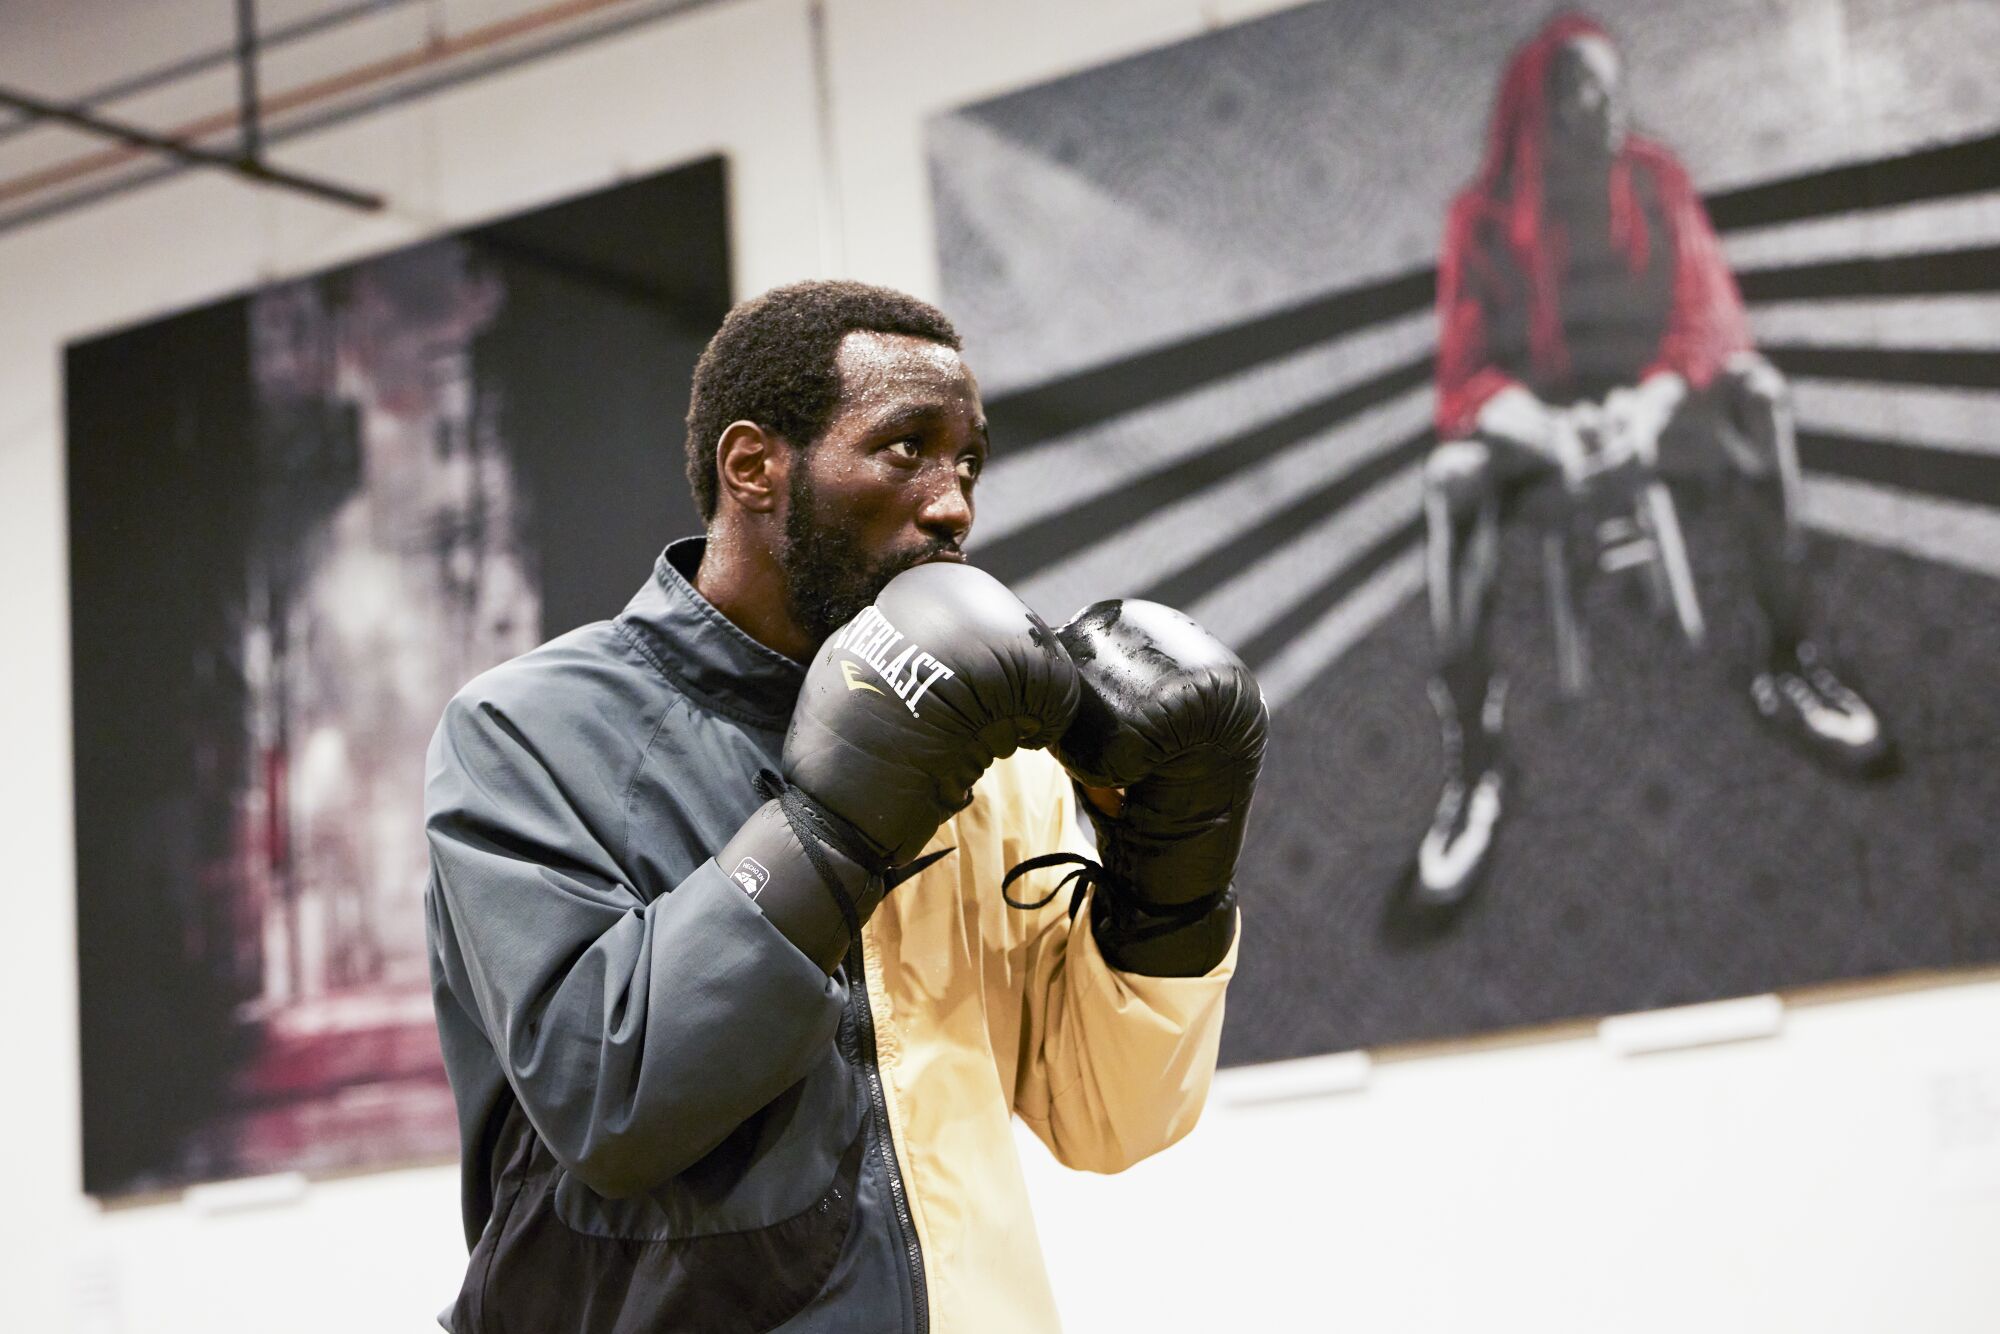 Terence "Bud" Crawford during a training session at the Triple Threat Boxing Gym